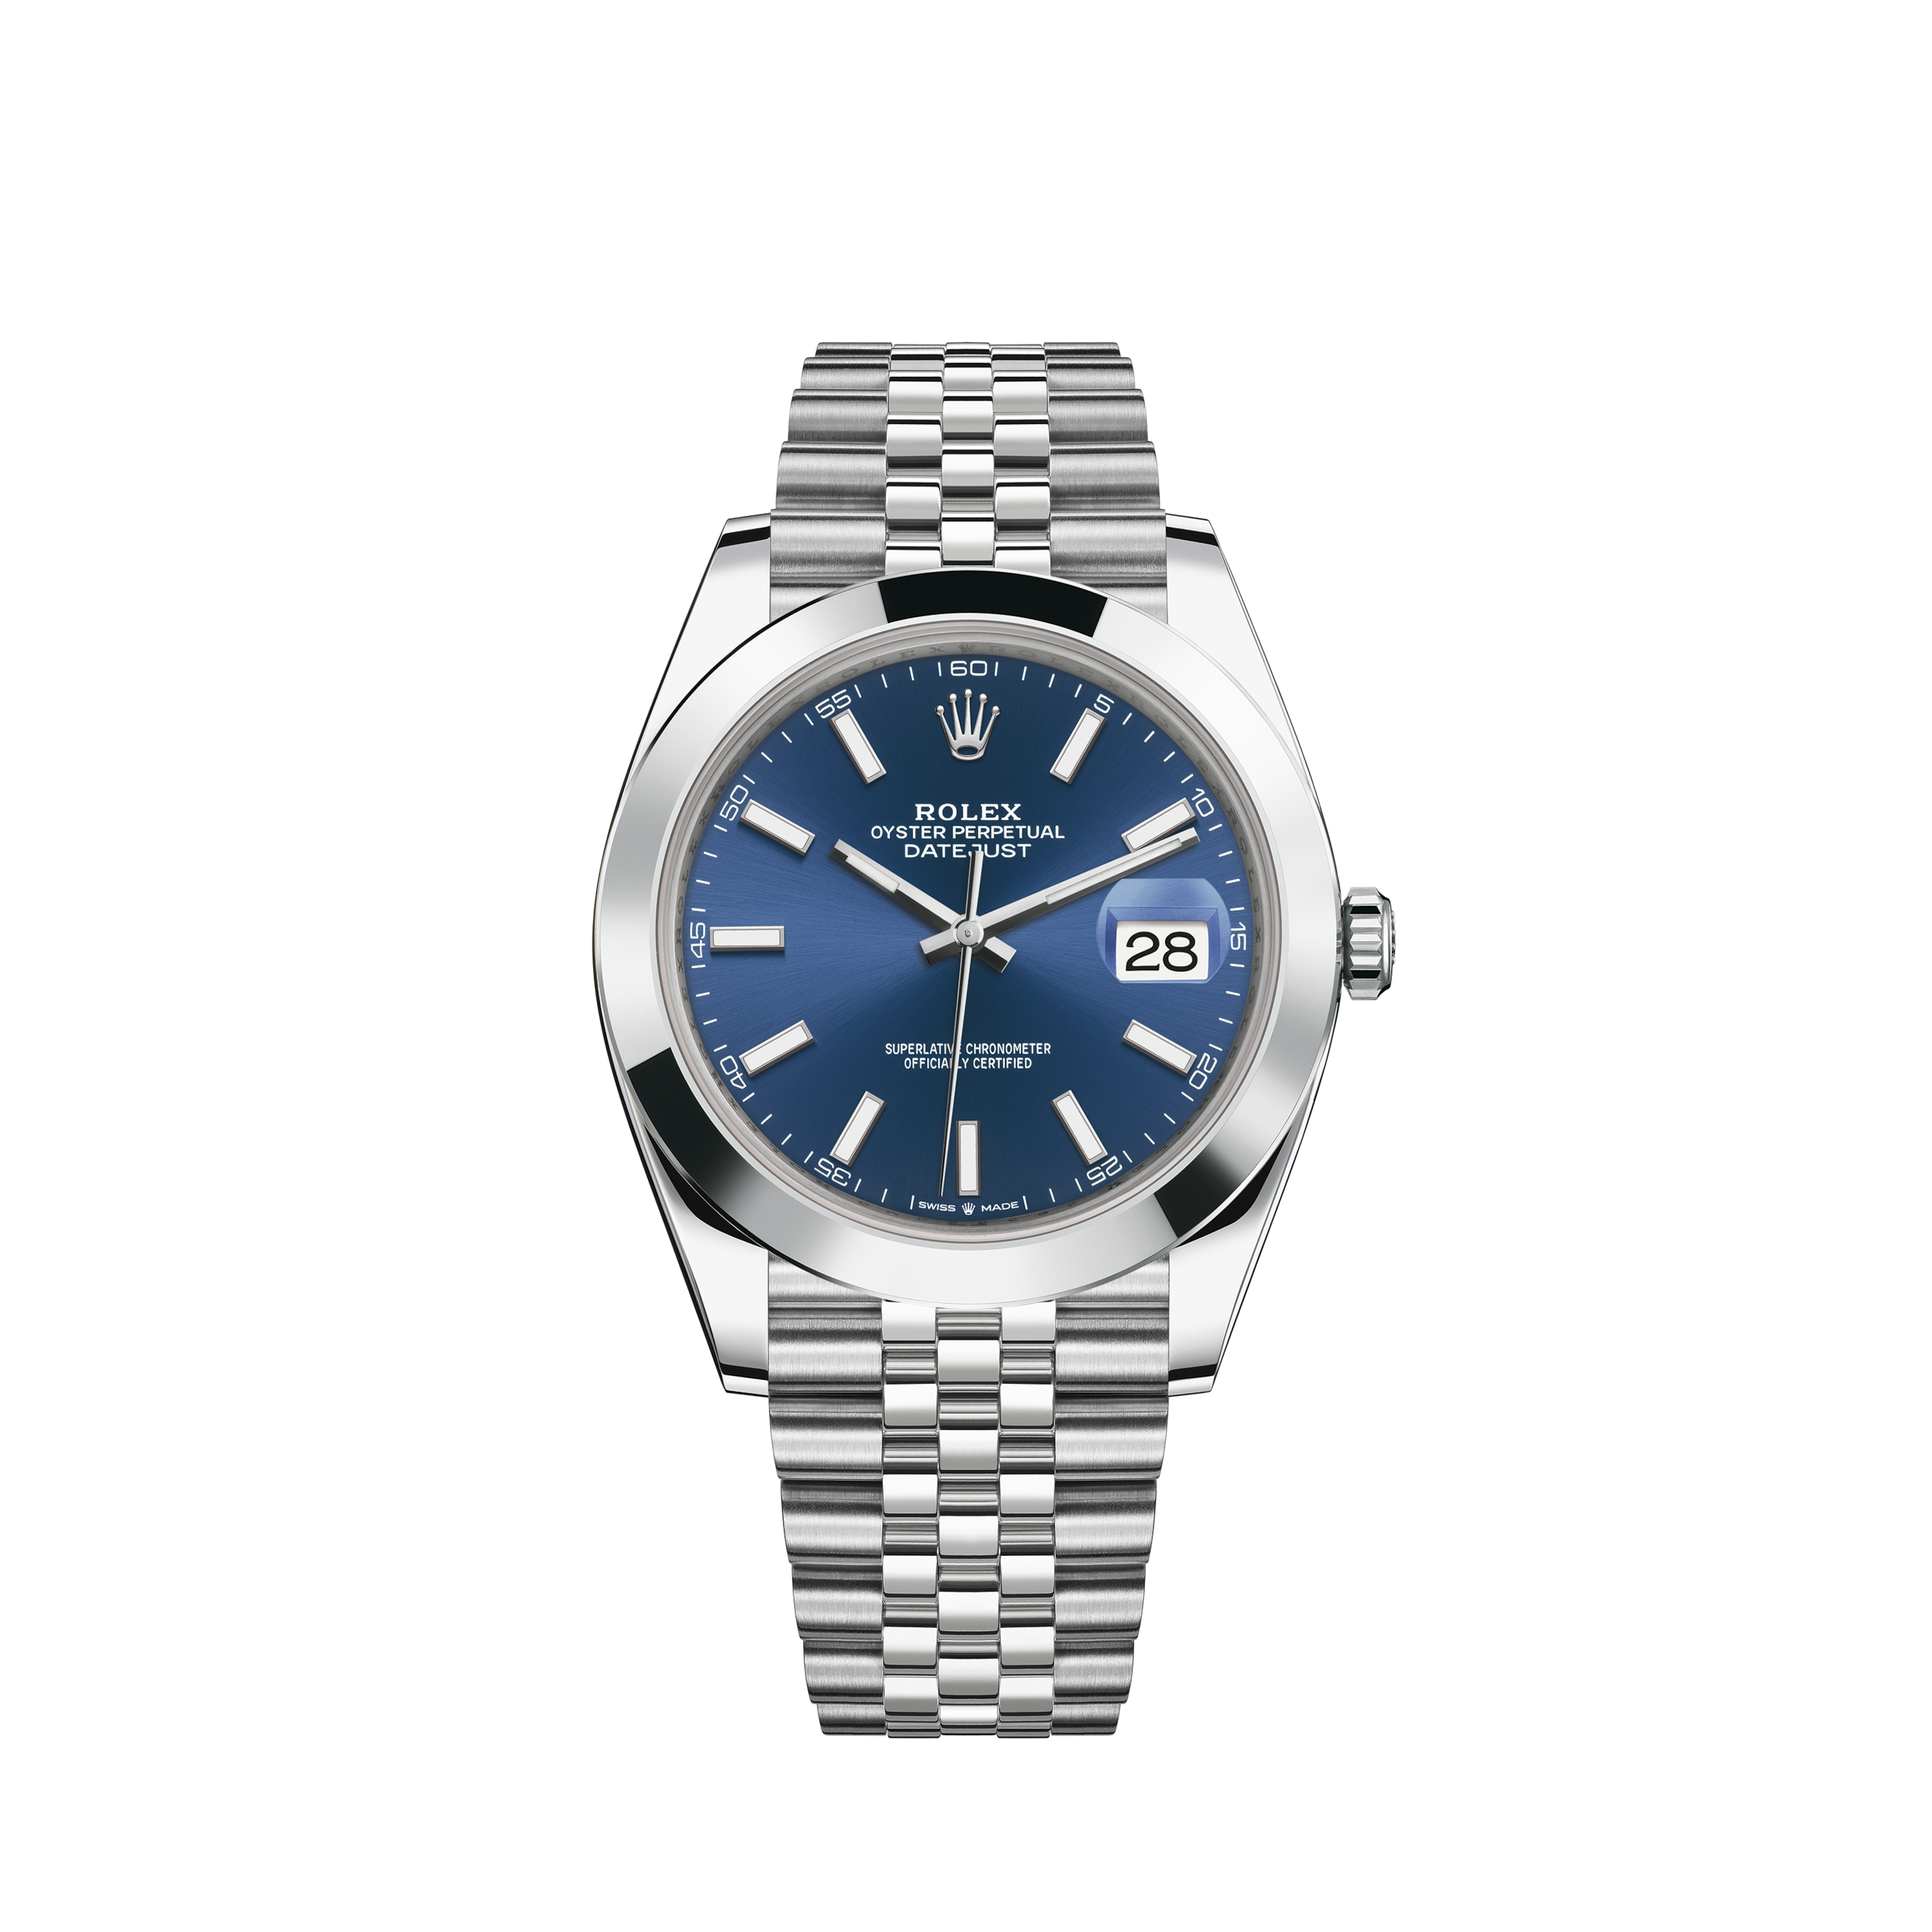 Rolex Datejust II Ref.116334 18ct White Gold, Blue dial with Roman numerals Box & Papers 2015